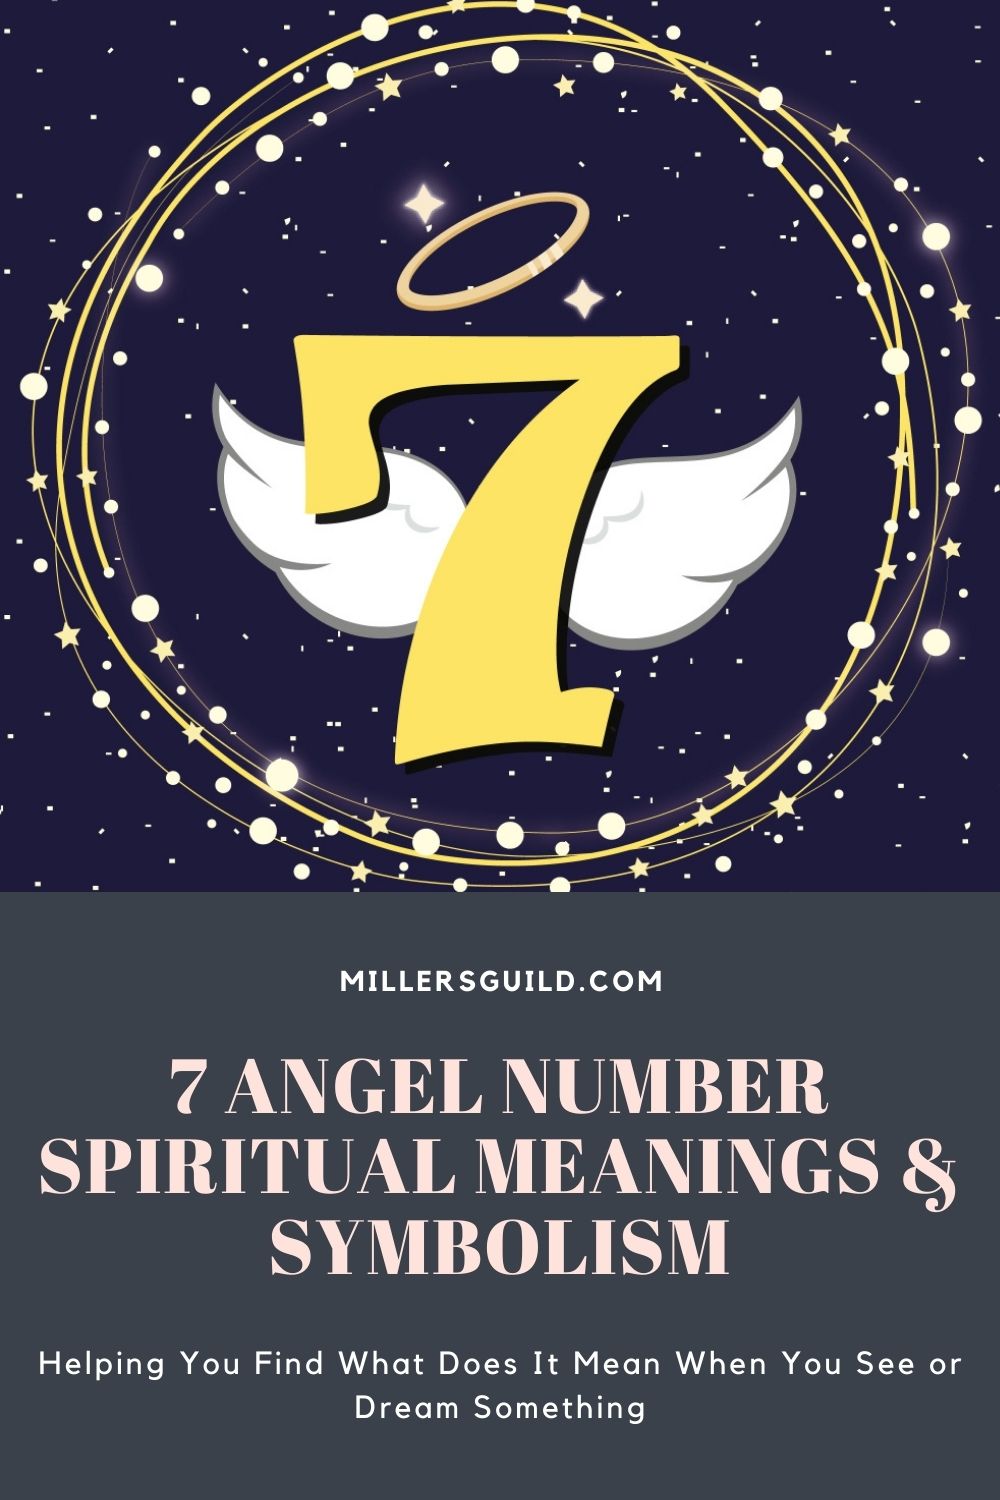 7 Angel Number Spiritual Meanings & Symbolism 1